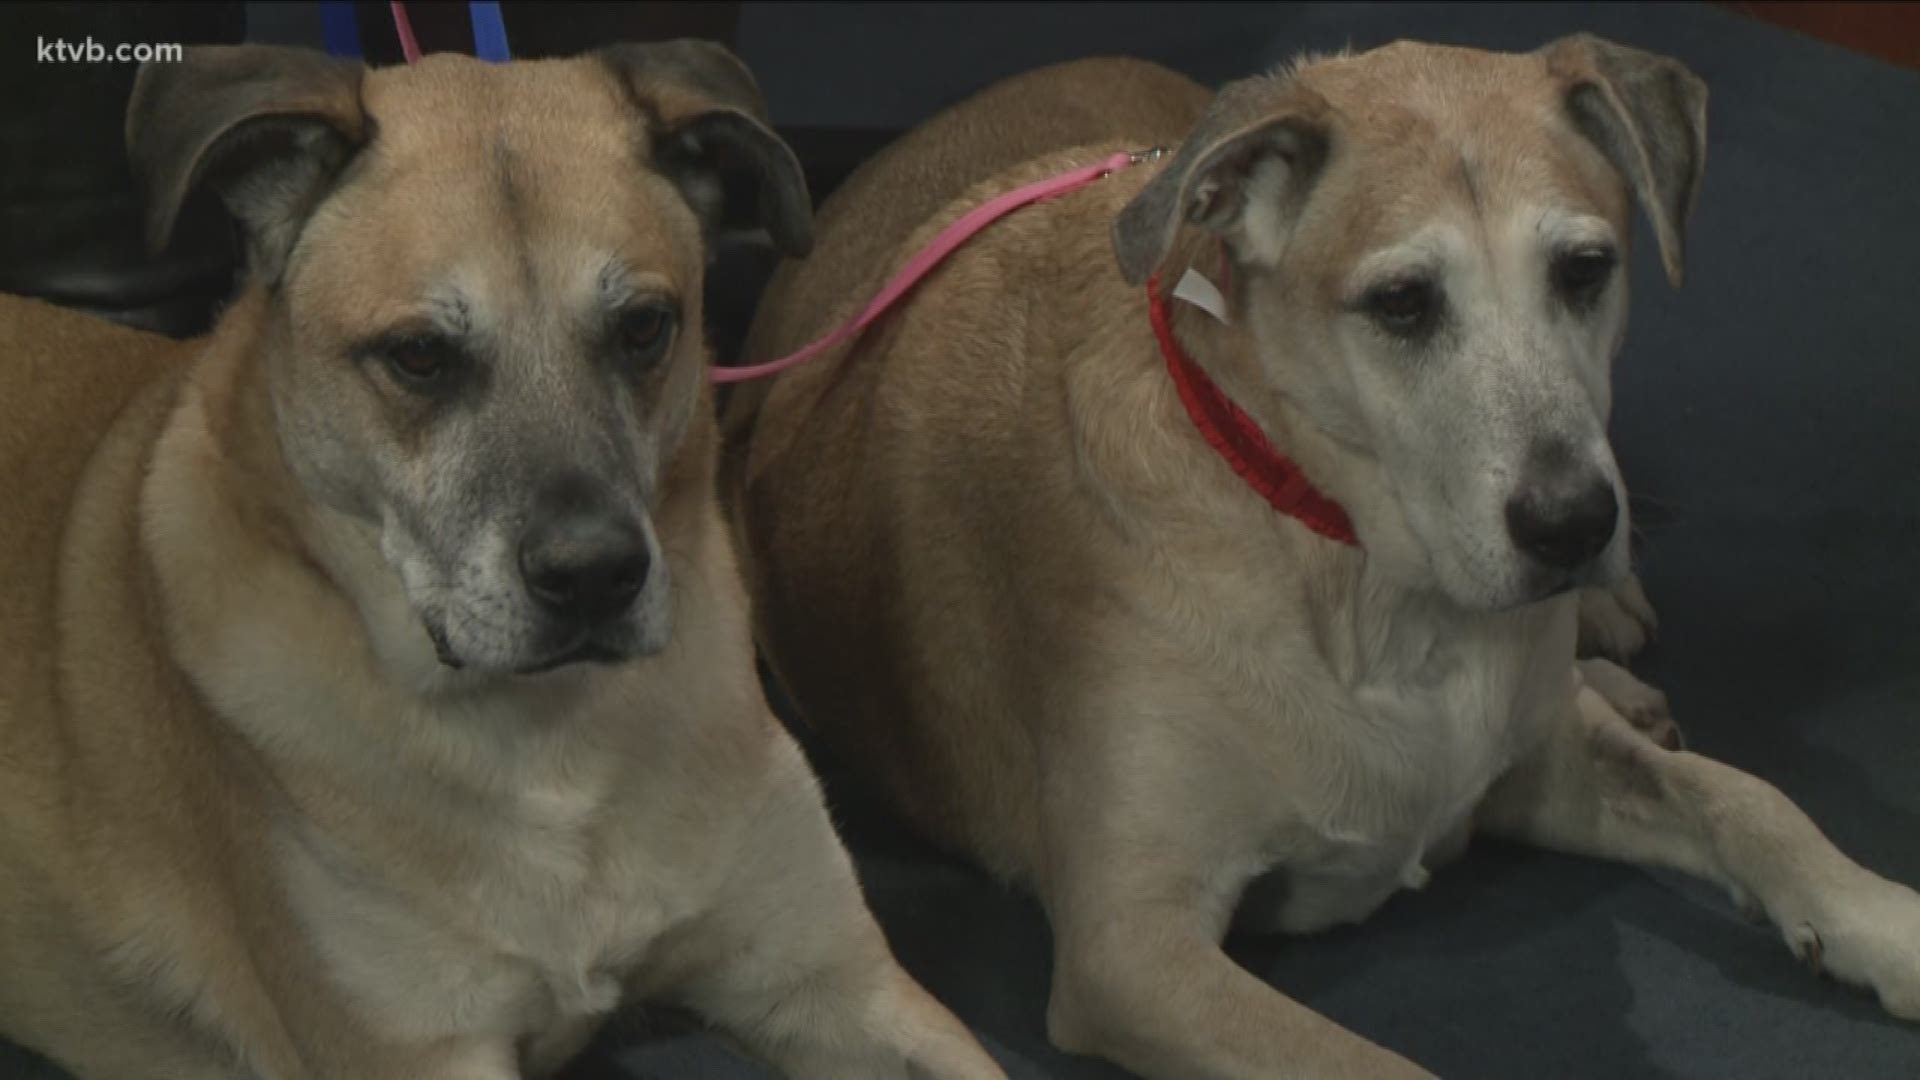 These 9-year-old lab mixes must be adopted together and go to a home with no cats.